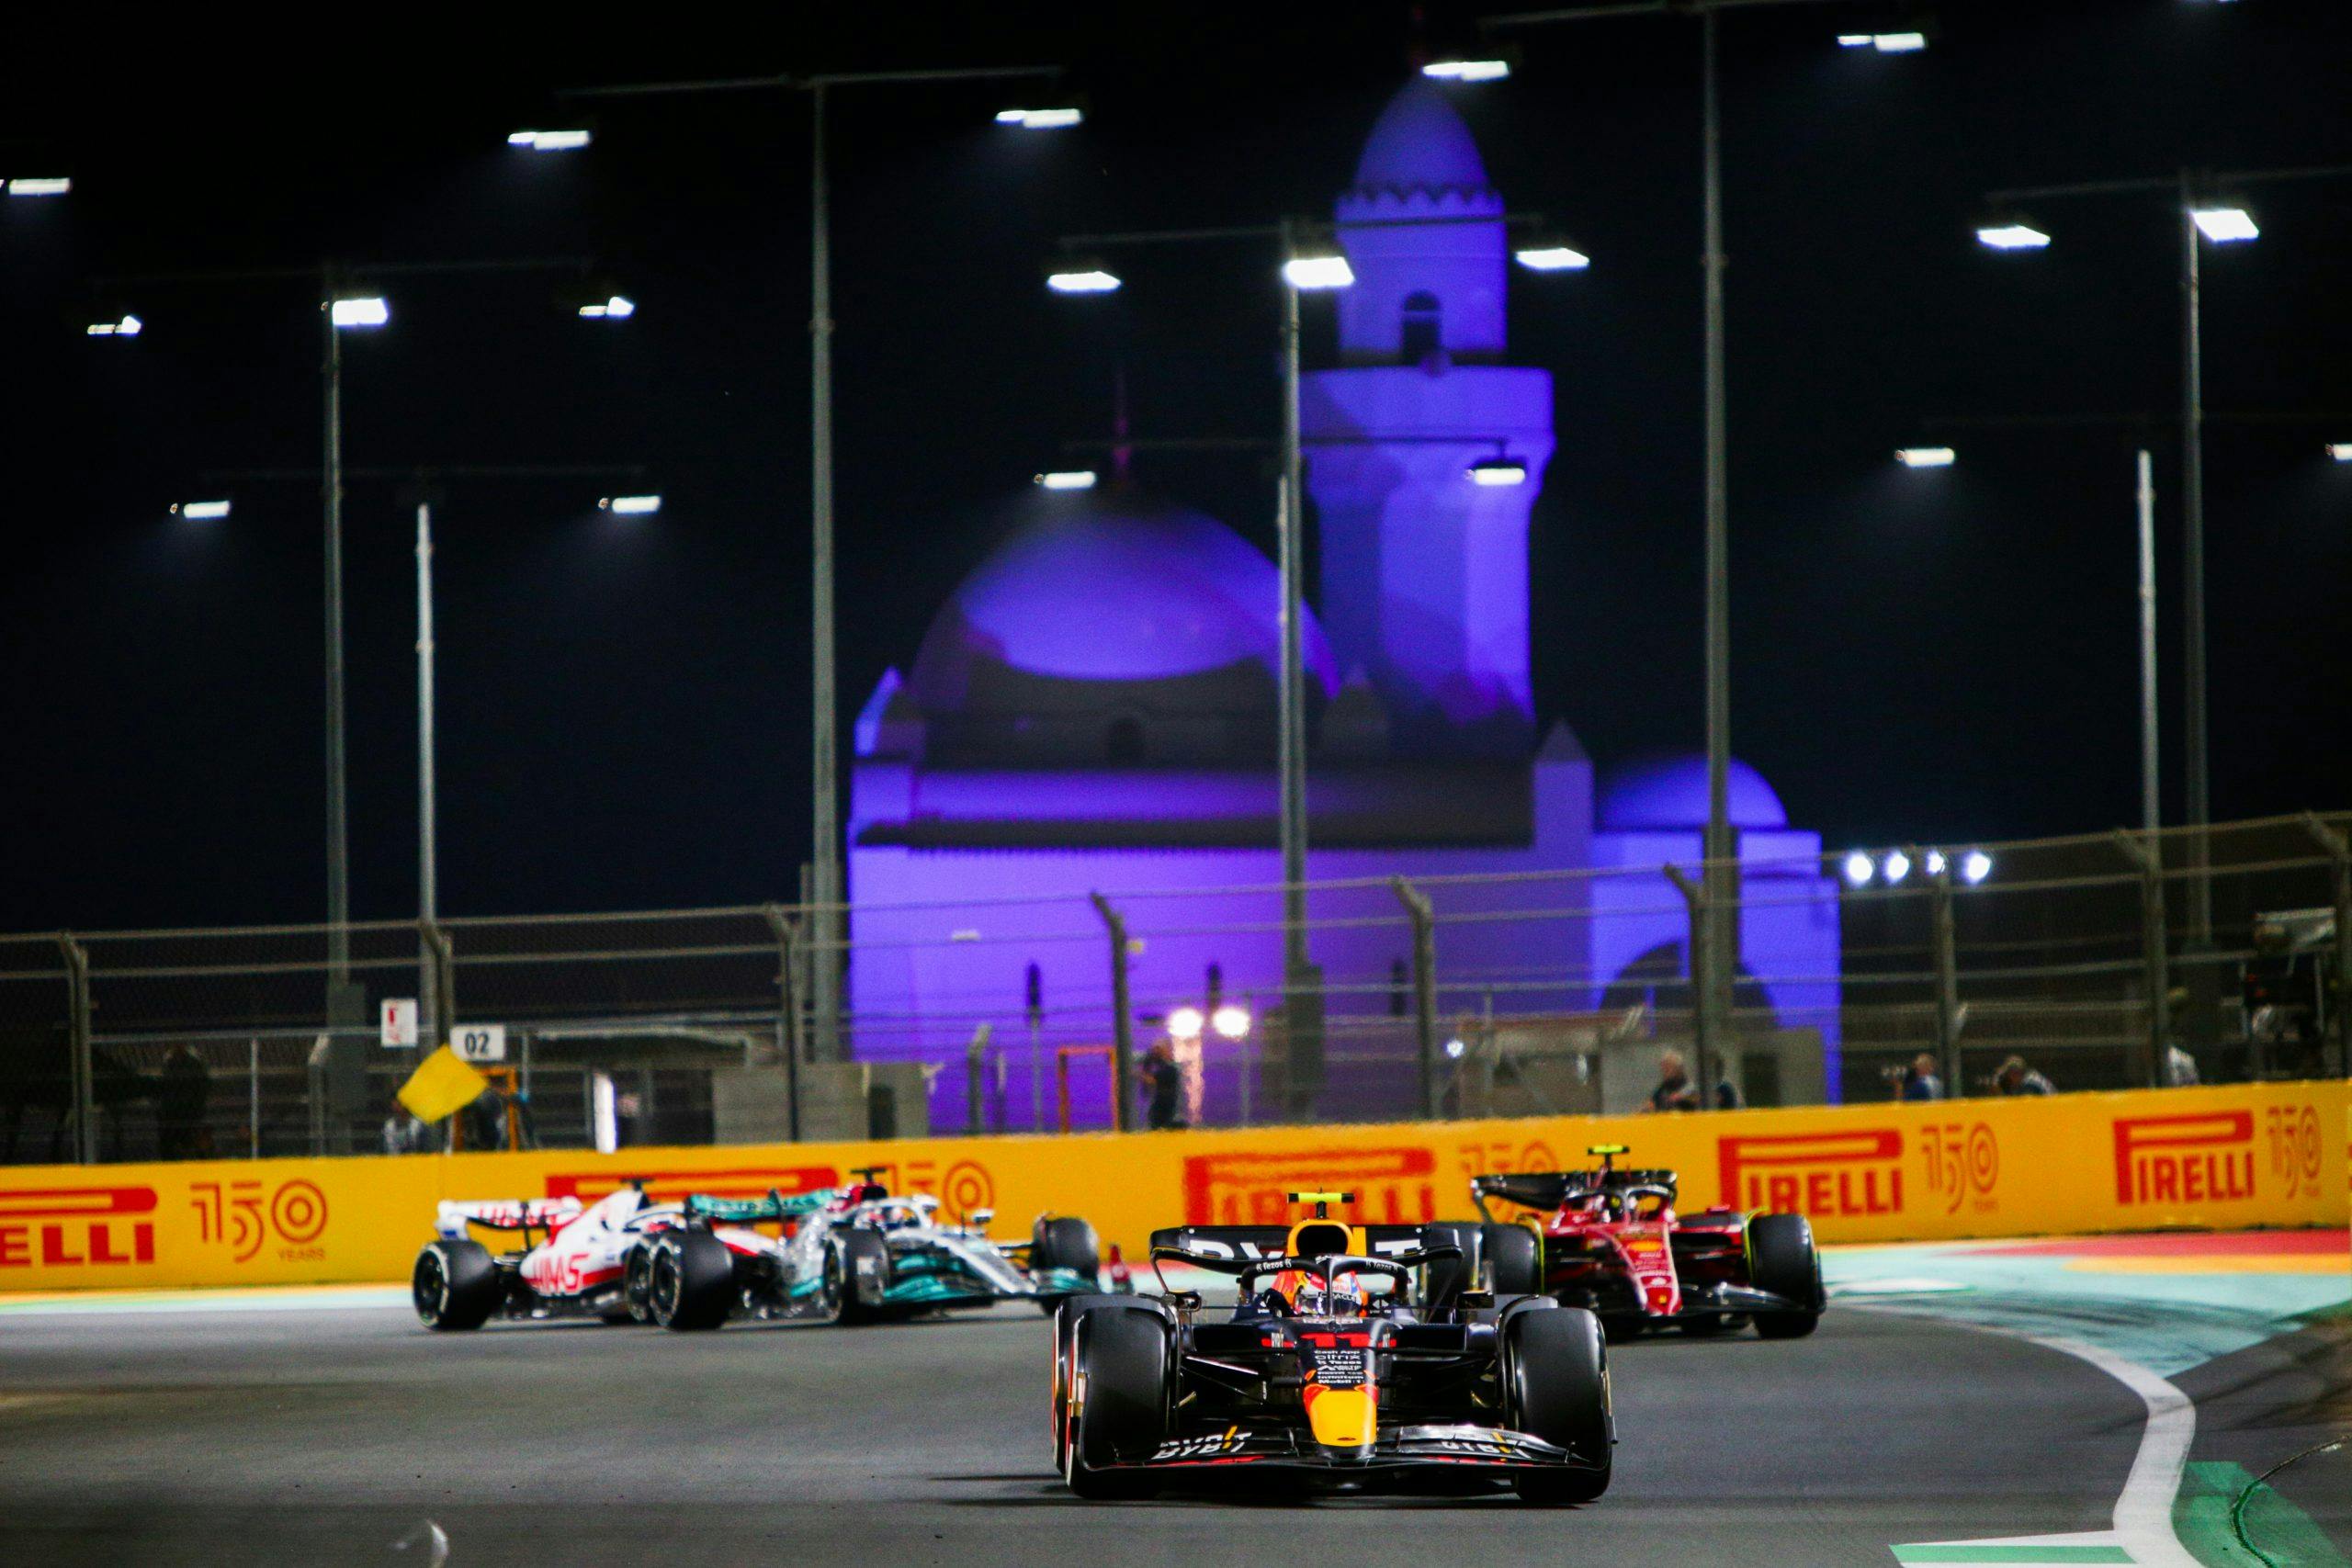 Red Bull Racing during the F1 Grand Prix mosque background